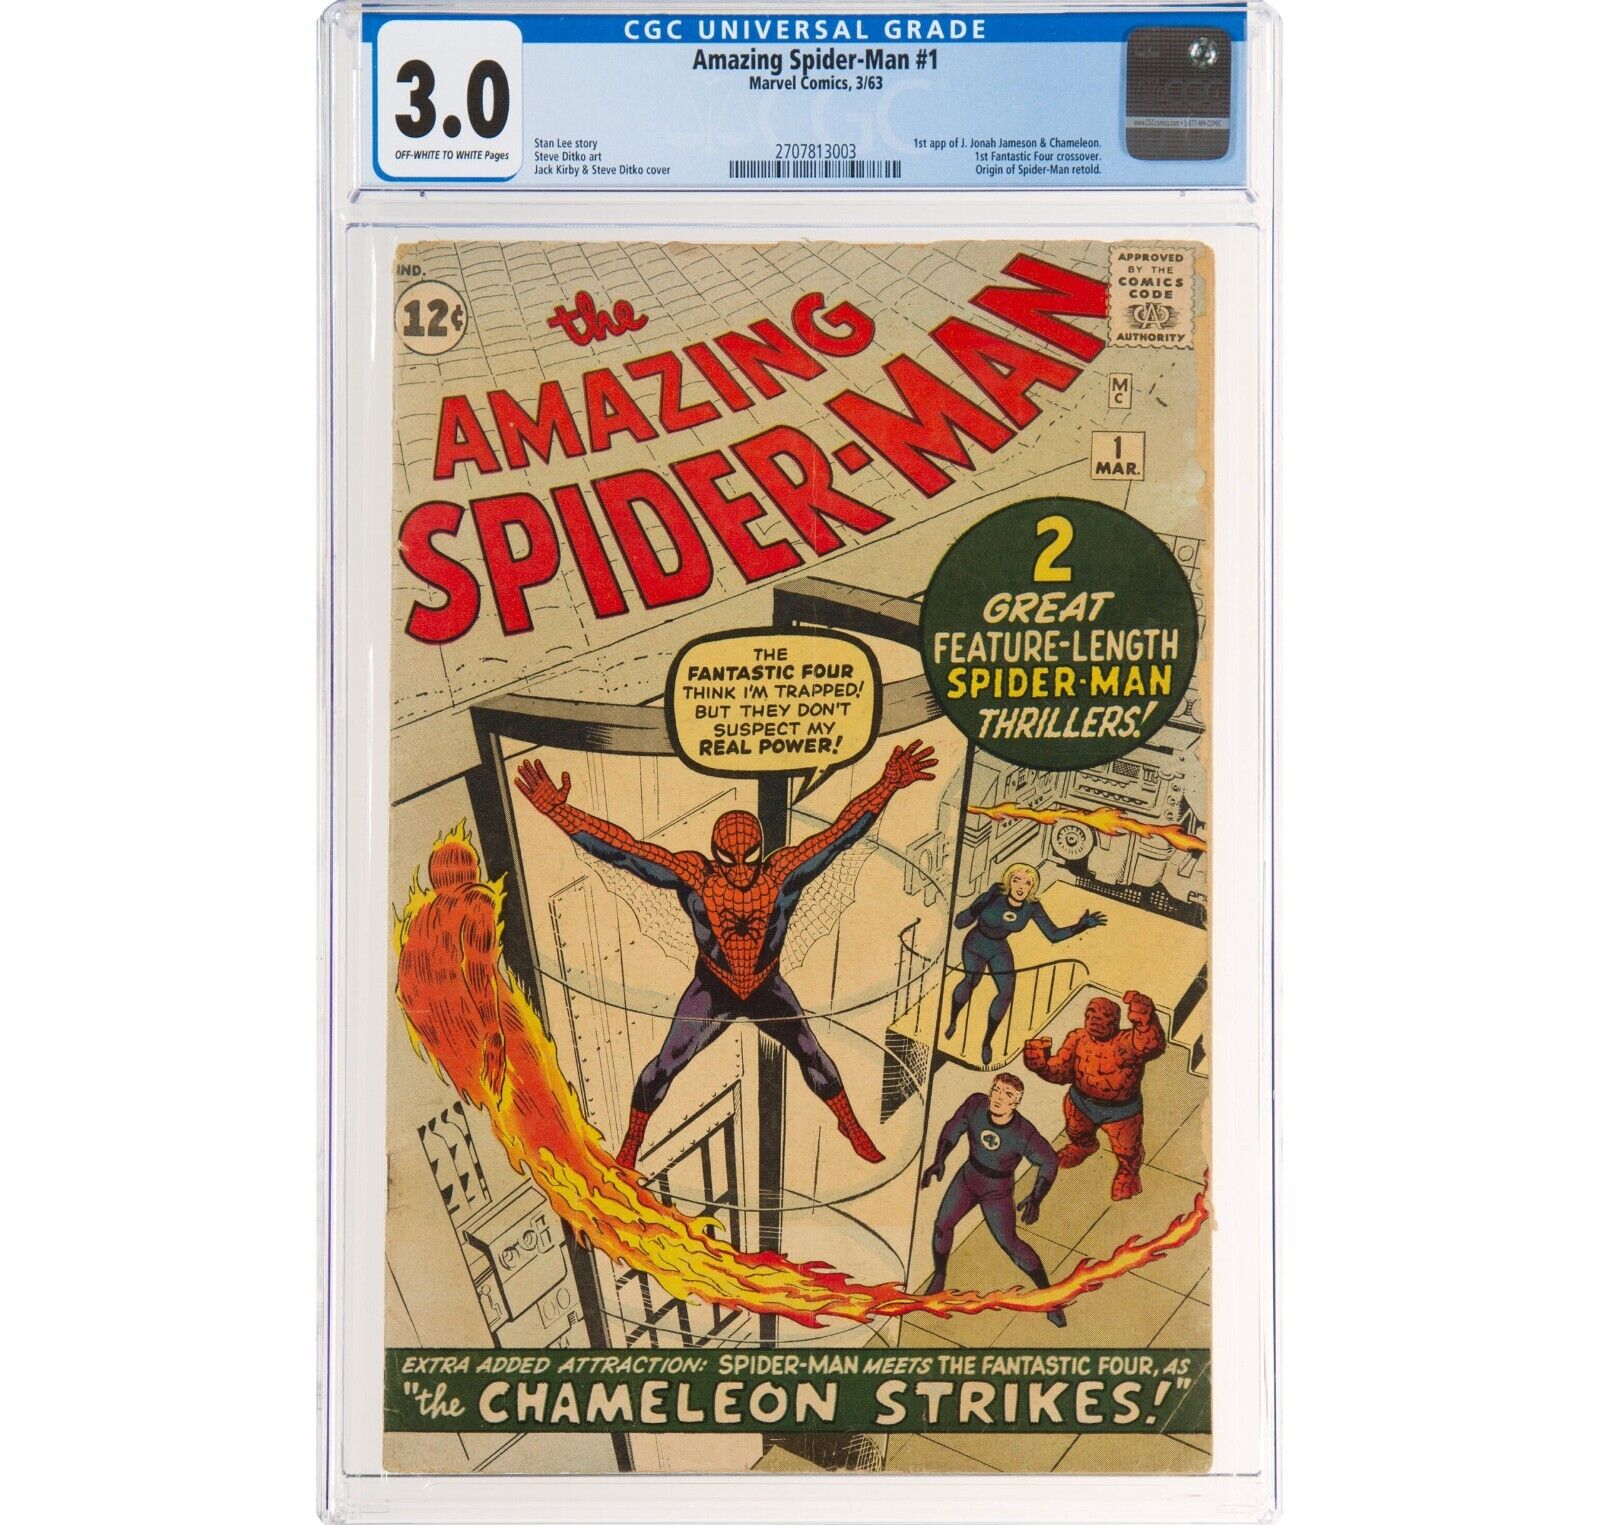 The Amazing SpiderMan 1 Marvel 1963 CGC GDVG 30 Offwhite to white pages